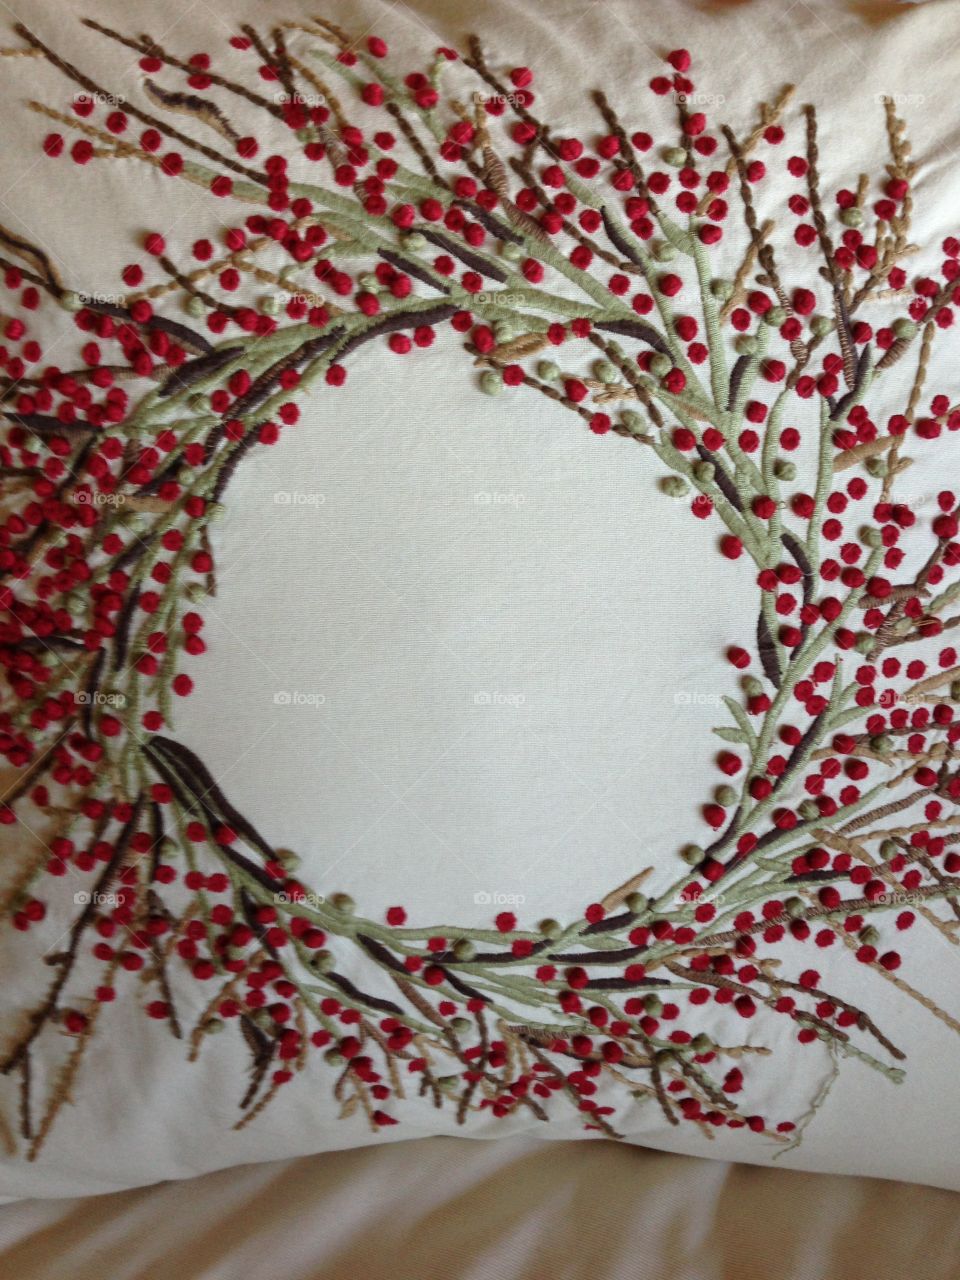 A Winter wreath with red berries, always a nice but simple look.